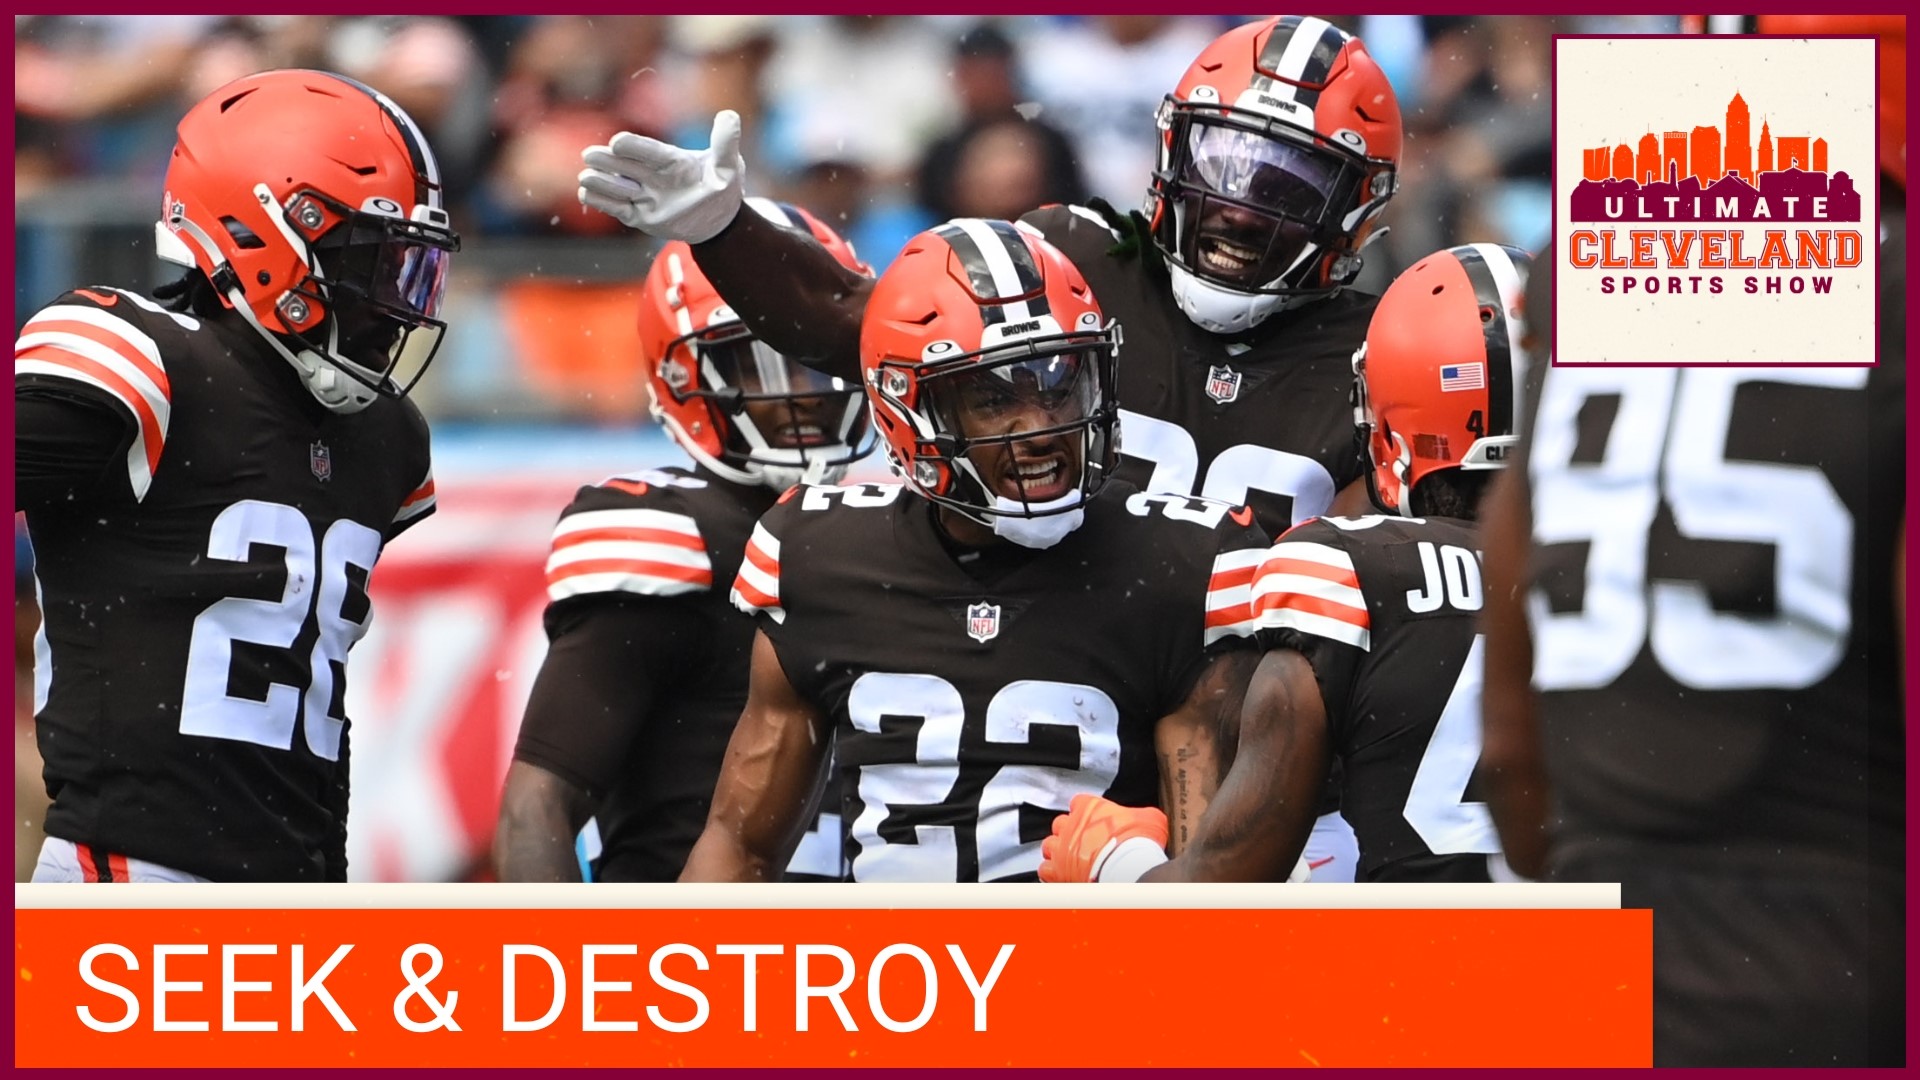 The Cleveland Browns defense has a chance to be elite this season. If that is the case, there may not be a better matchup on the schedule to flex those defensive.